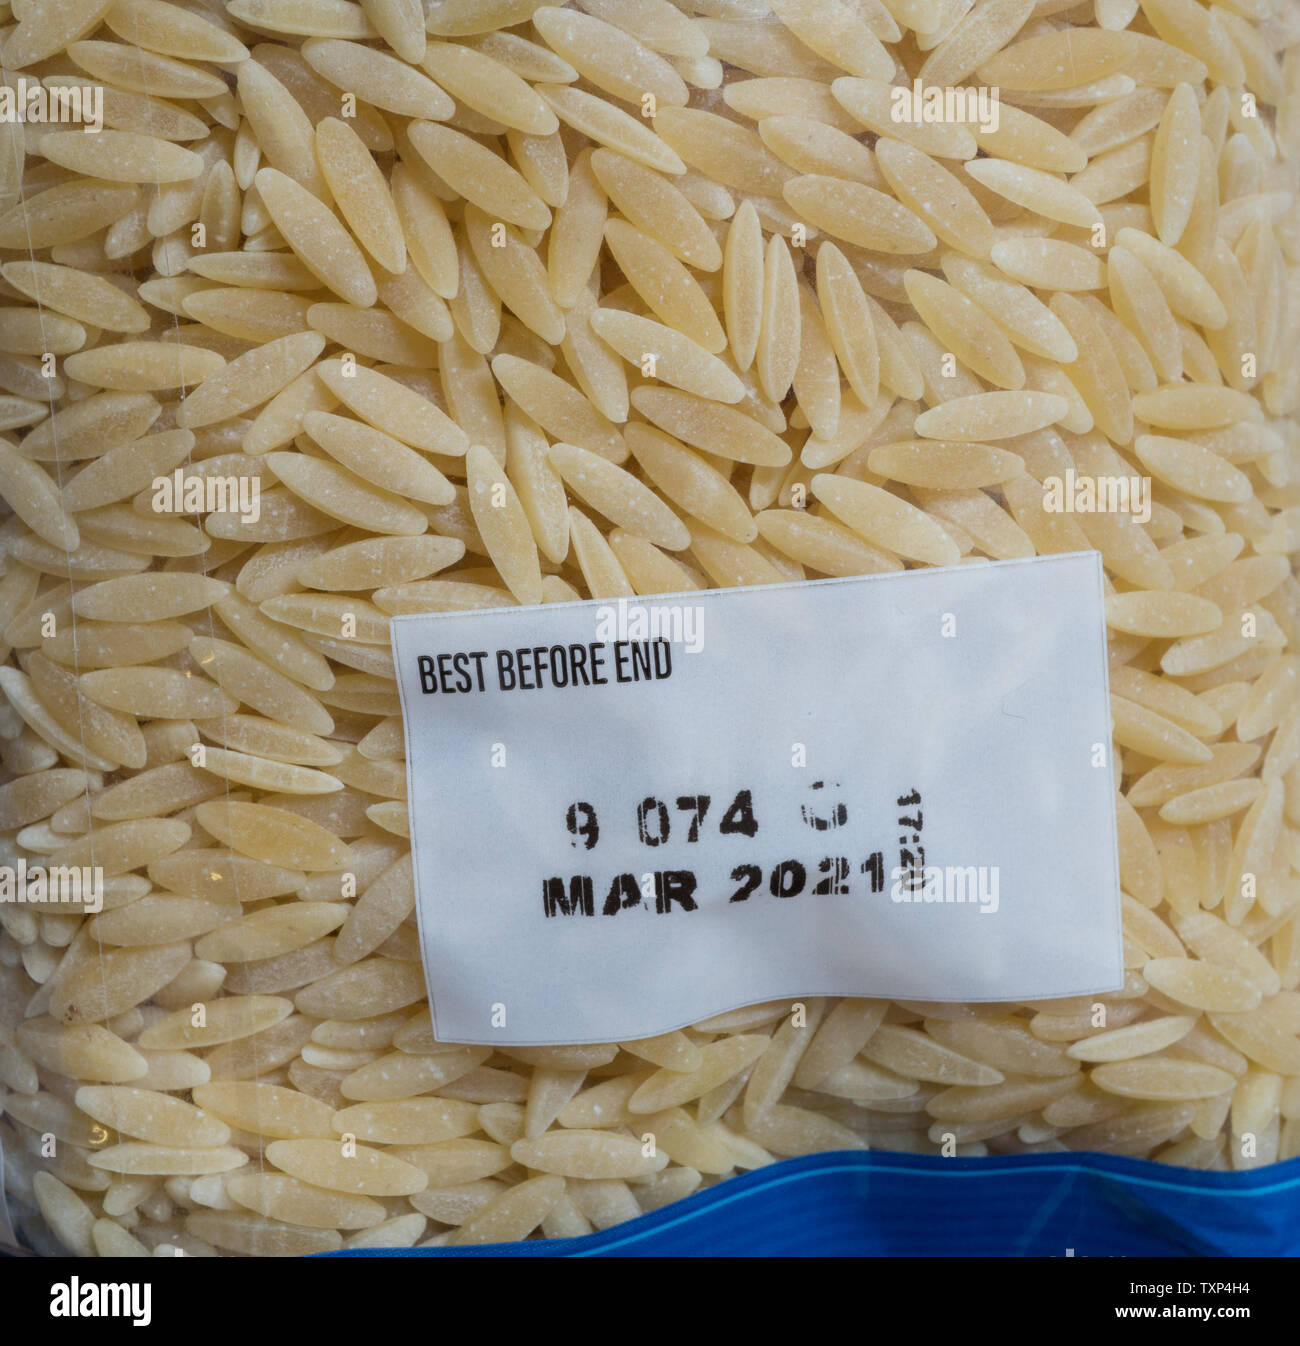 Rice in plastic packing with Best Before End date. UK Stock Photo